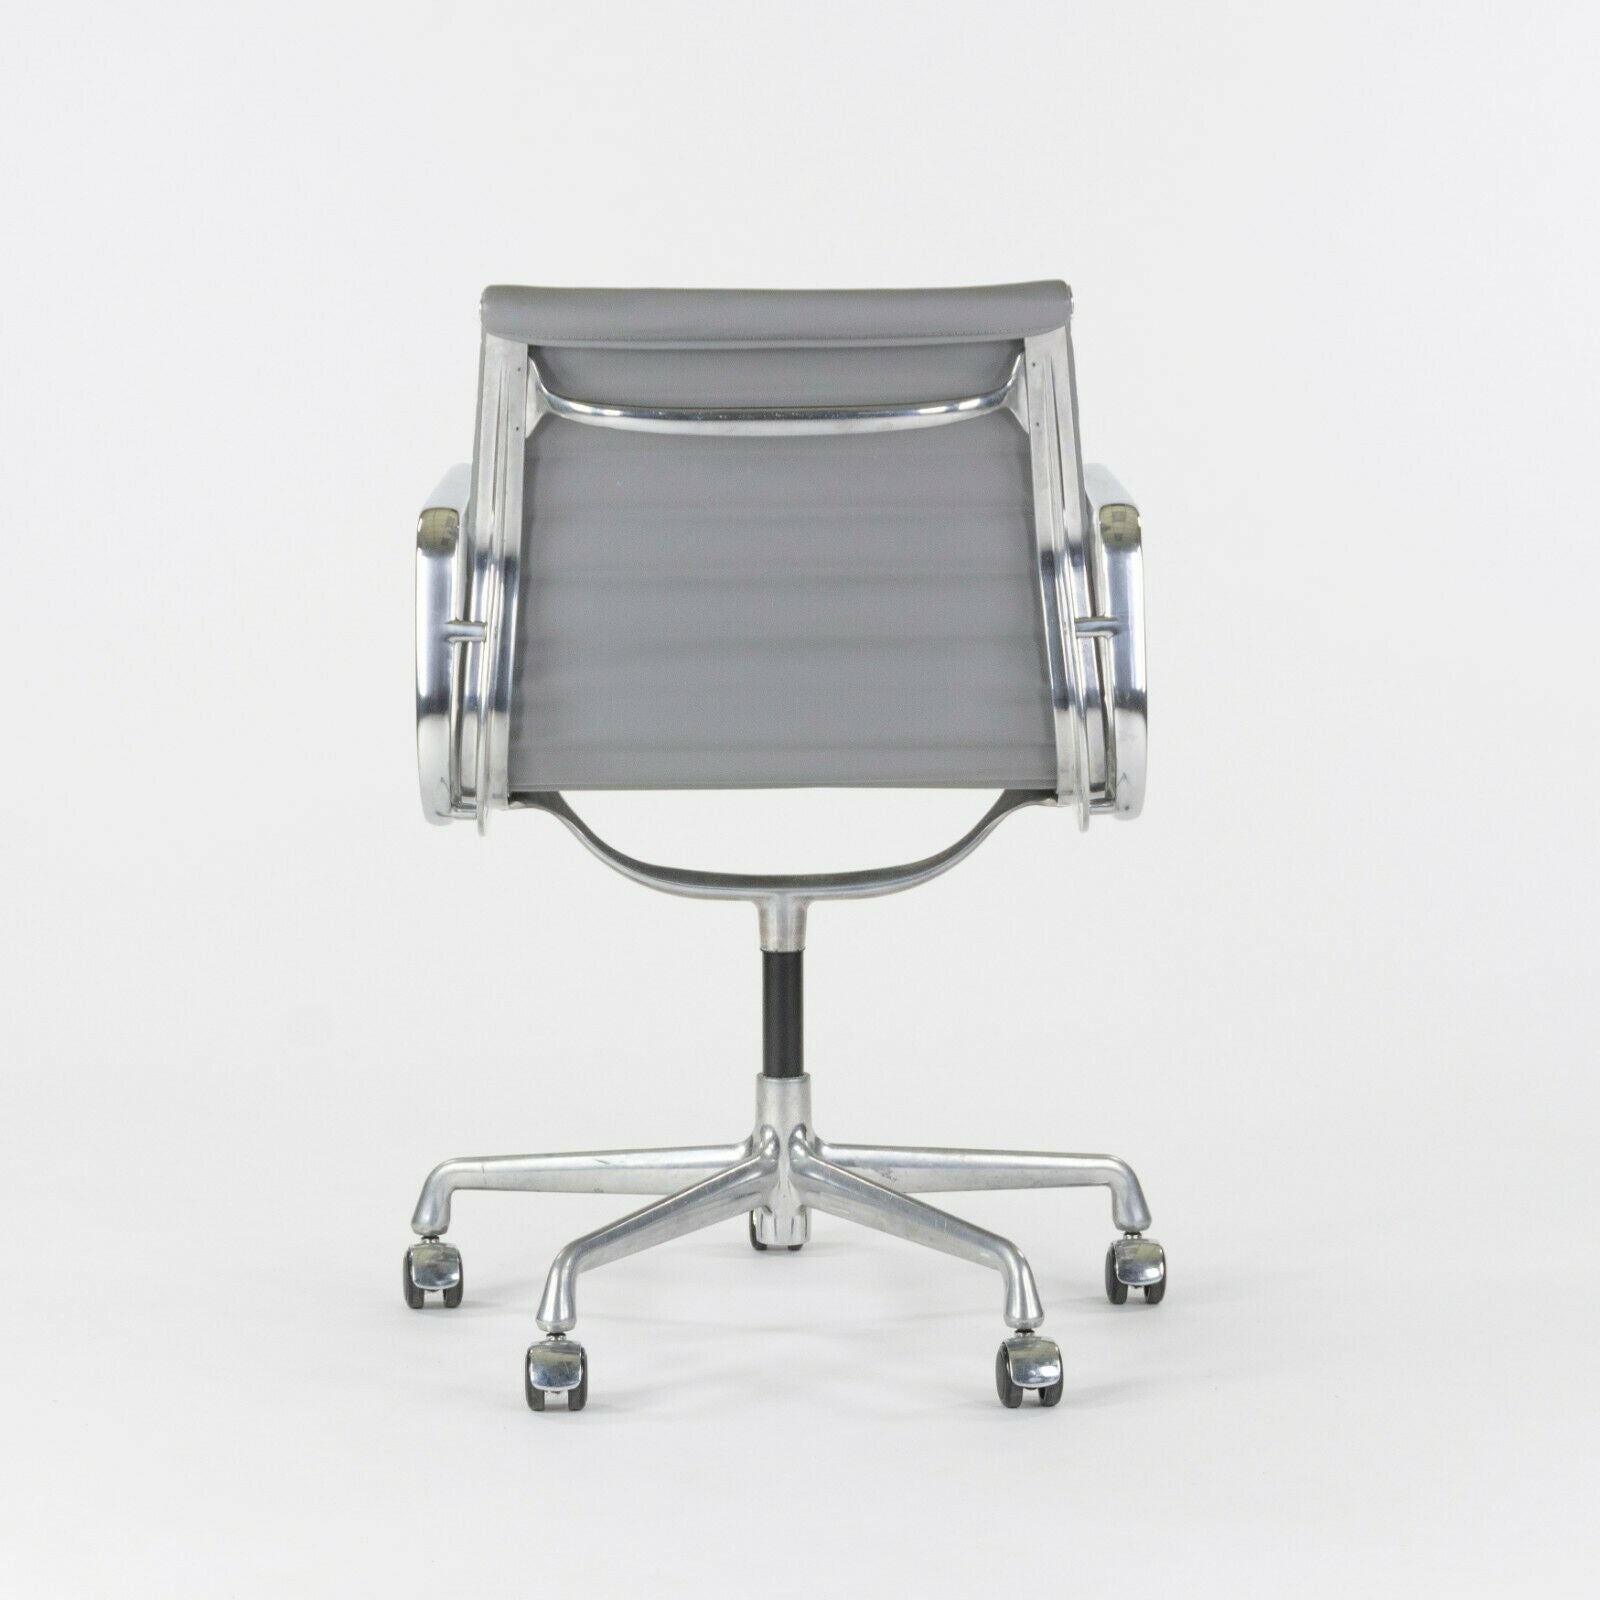 SOLD Herman Miller Eames Aluminum Group Management Side / Desk Chairs Gray Leather 2x Available